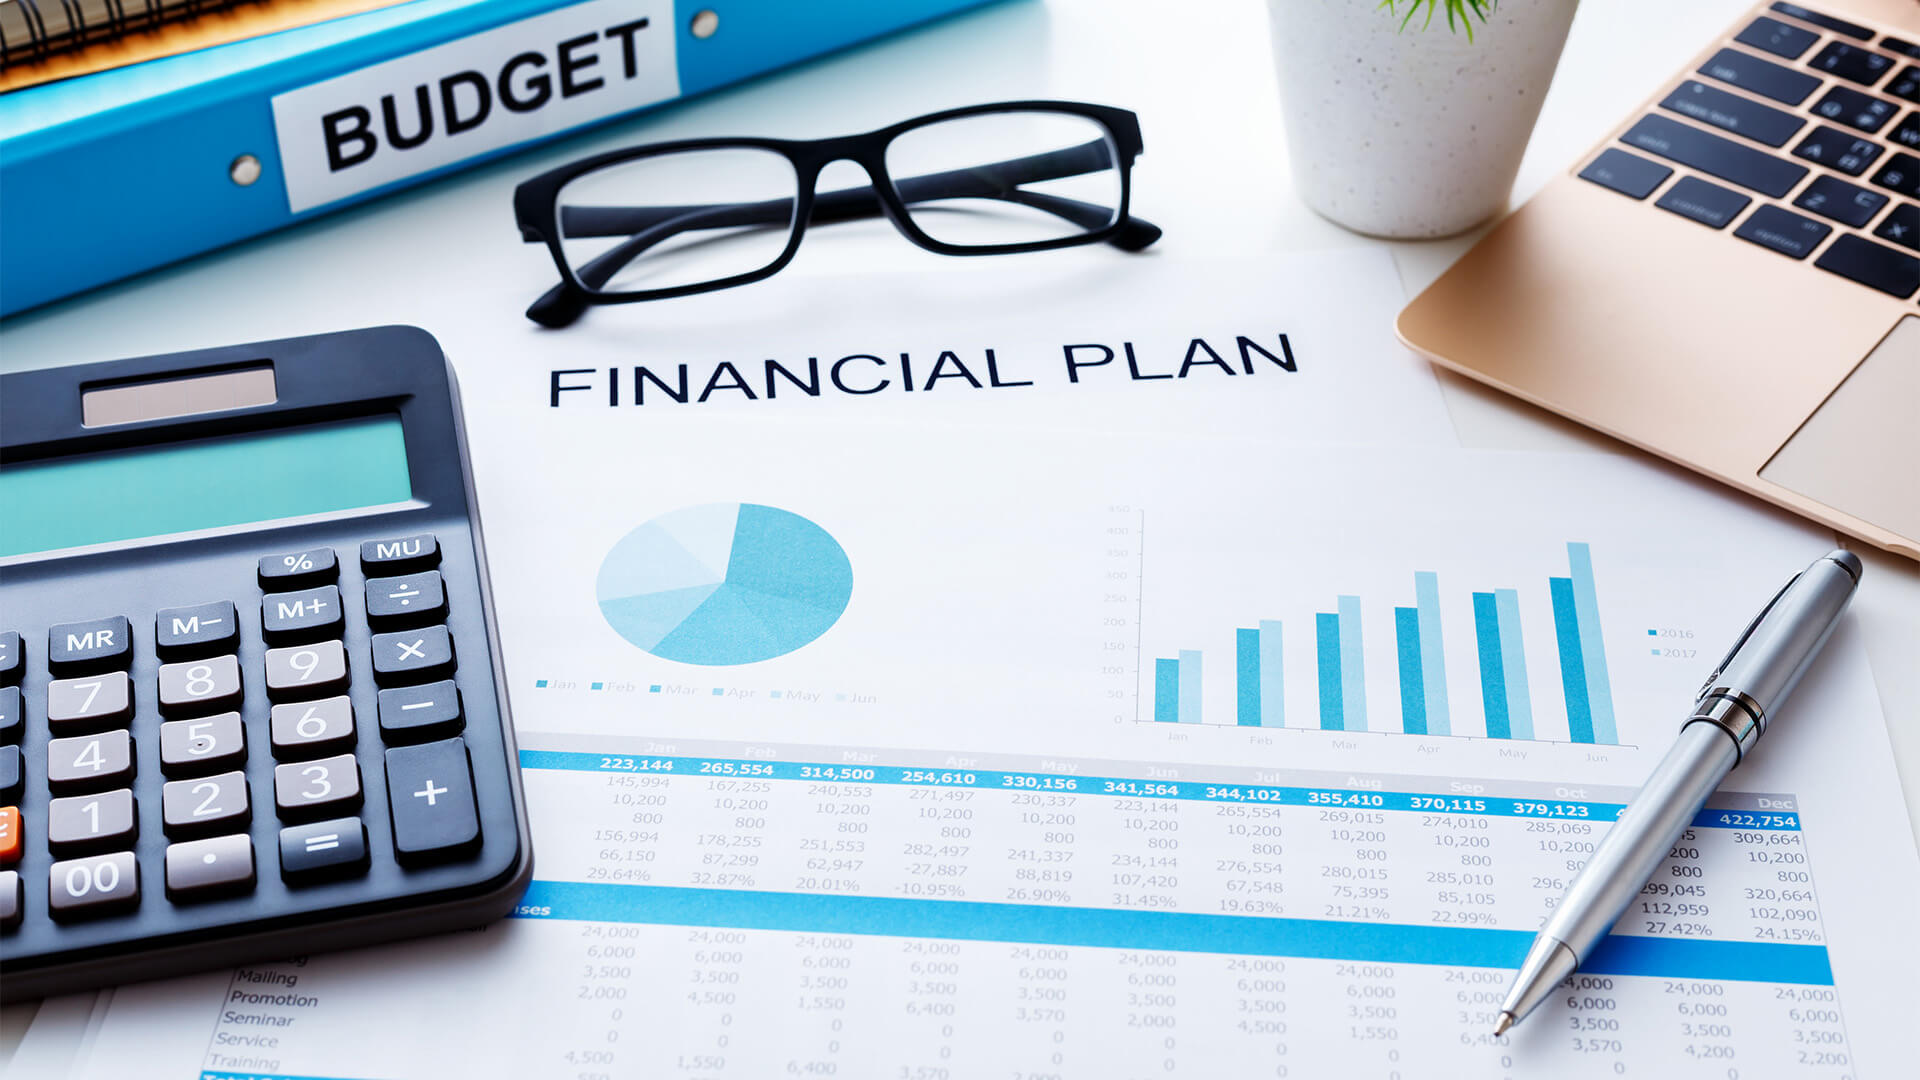 6 Ways to Improve Your Business's Financial Planning Approach for 2022